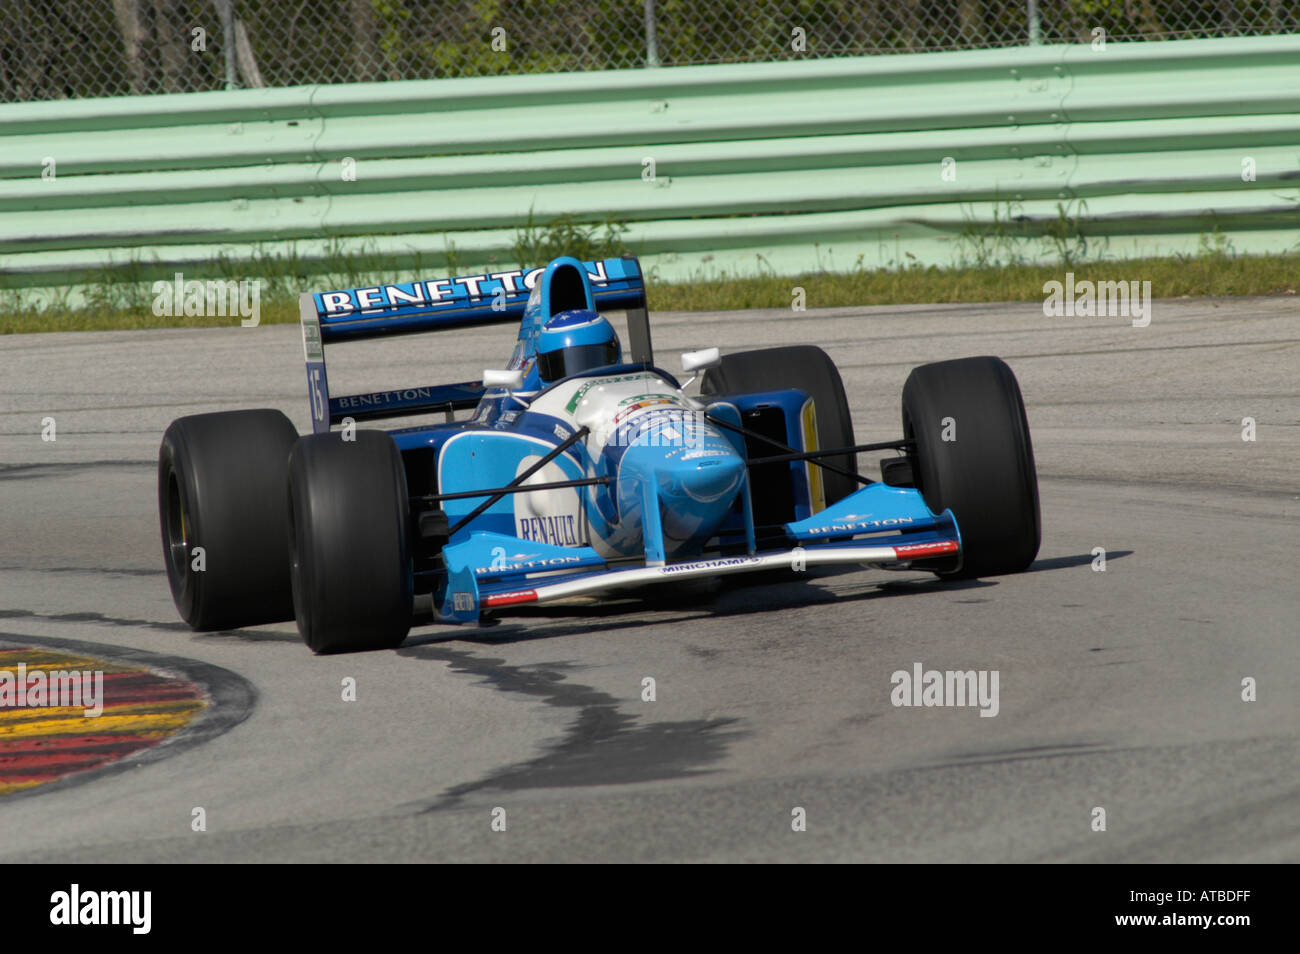 Jose Paredes races his ex Michael Schumacher 1992 Benetton B192 F1 car at the SVRA Vintage GT Challenge at Road America 2004 Stock Photo